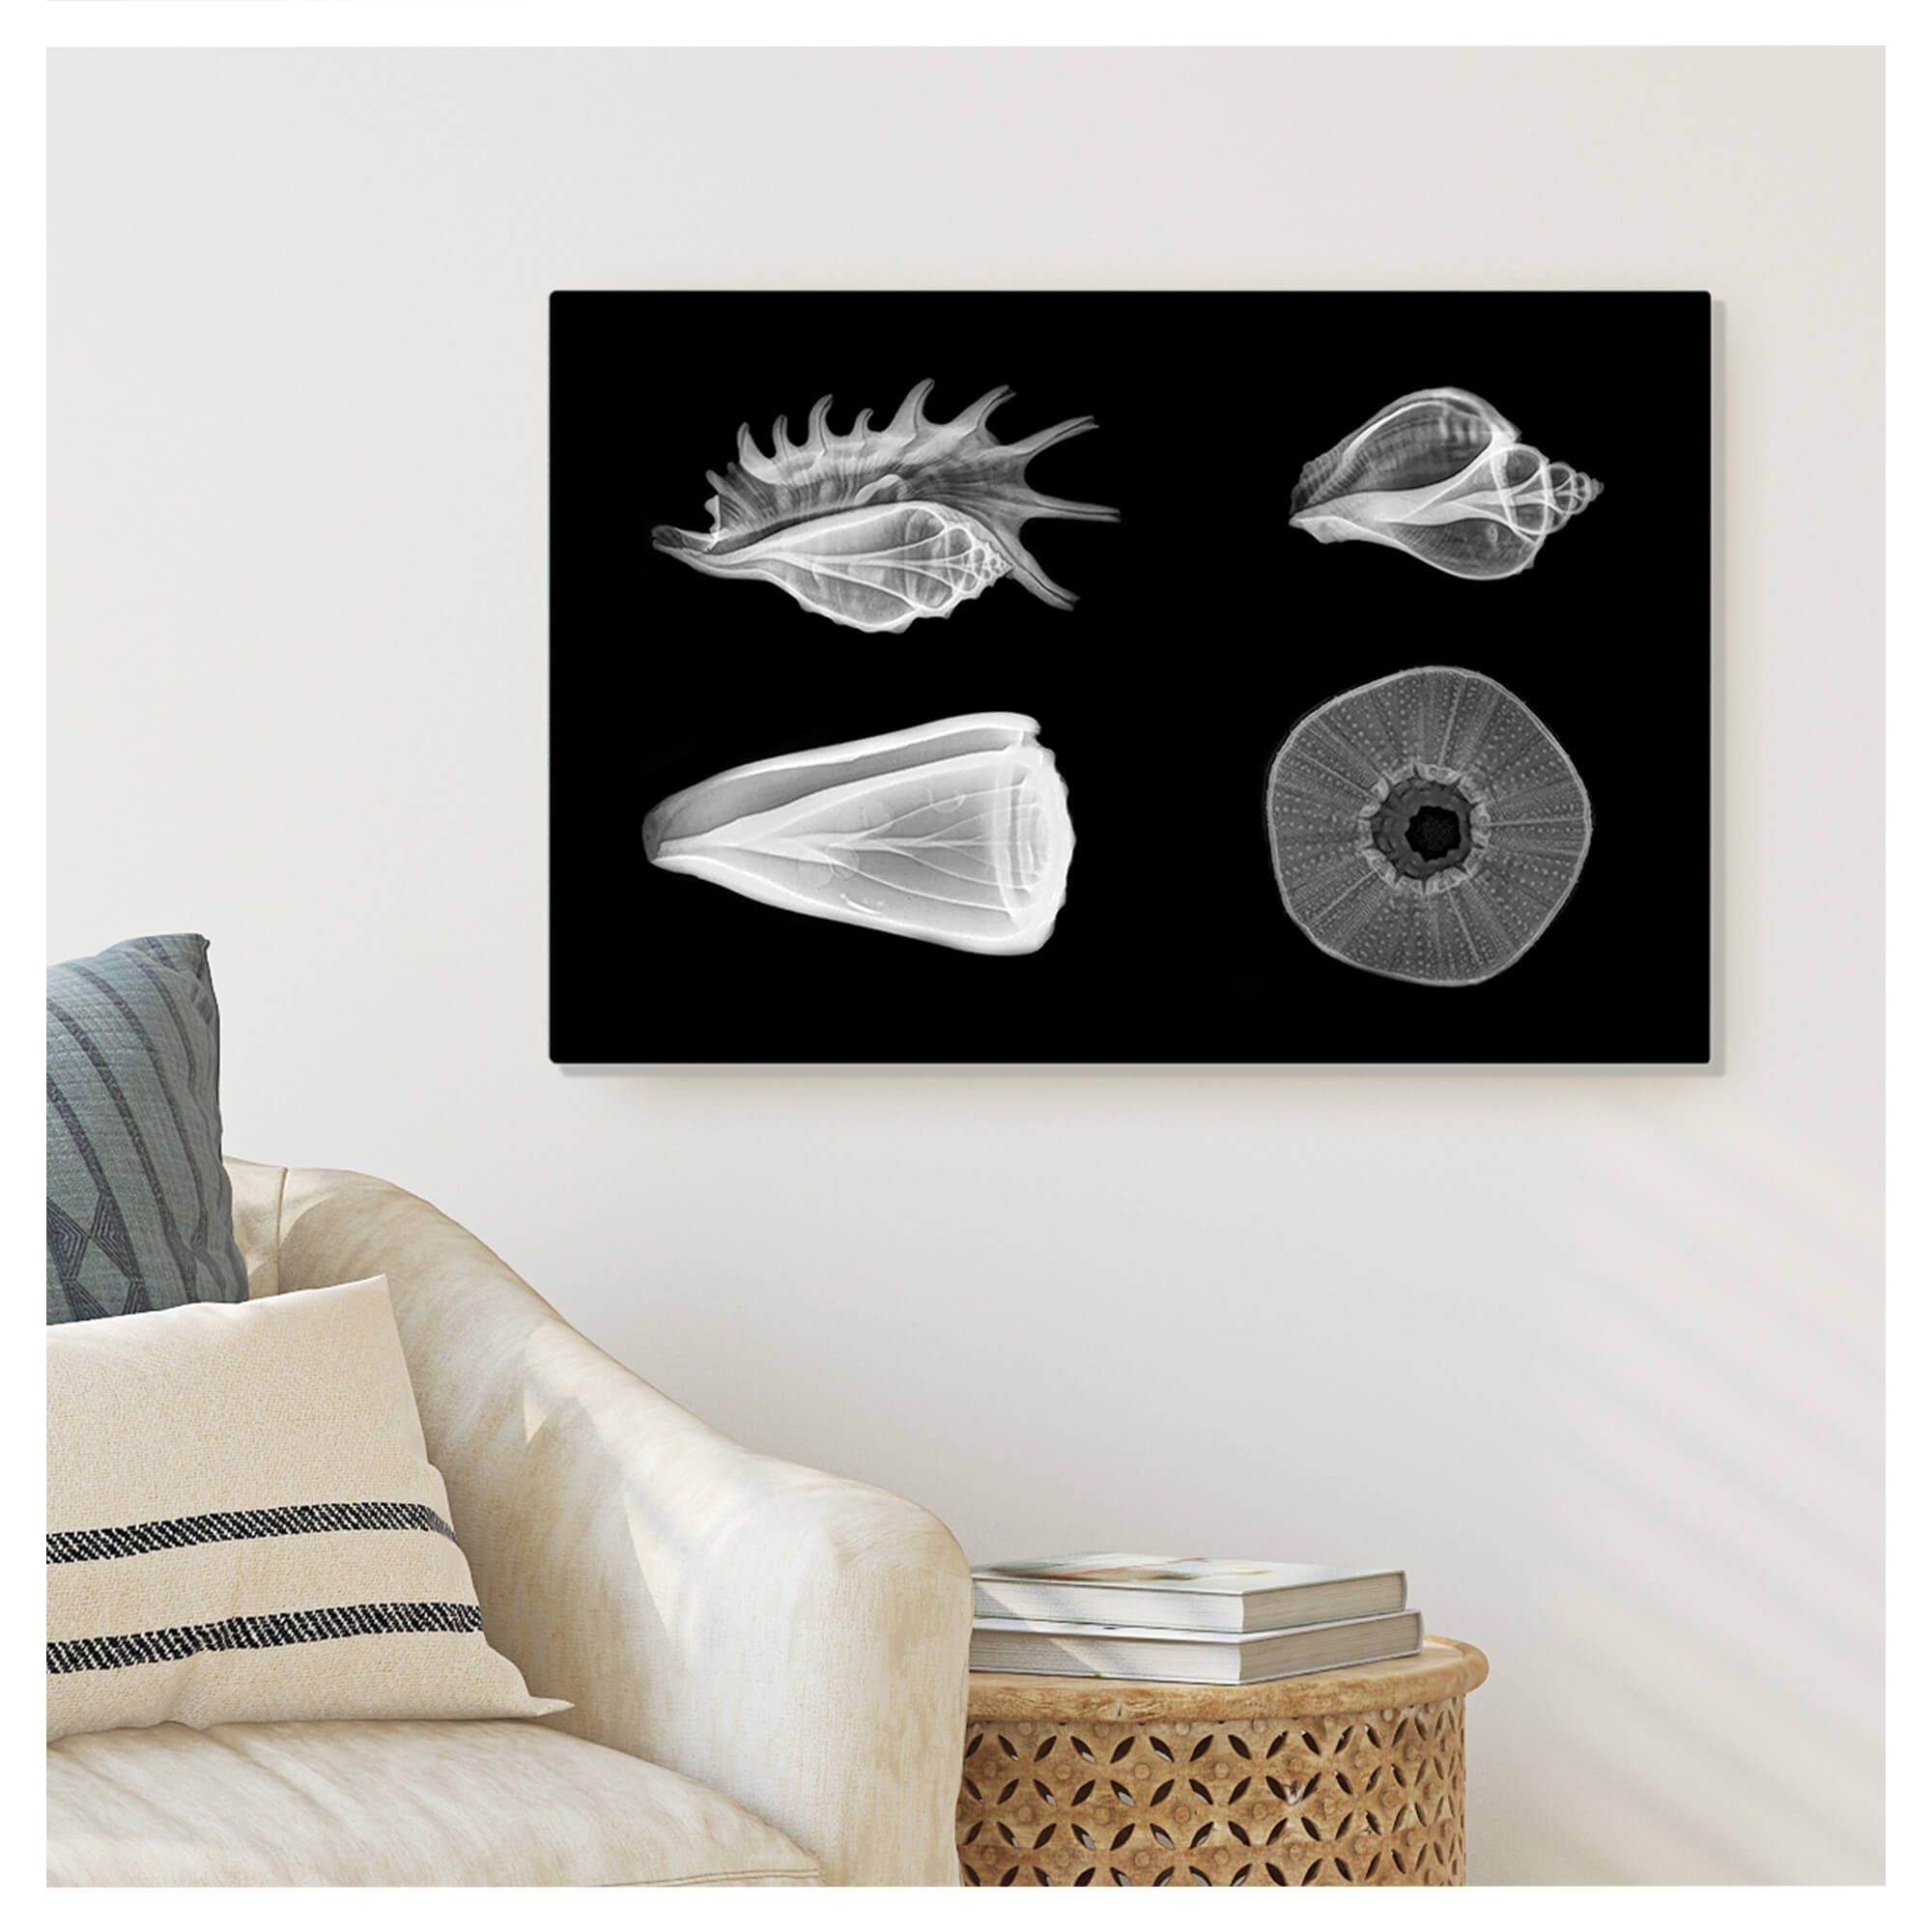 Metal print wall mockup featuring X-ray prints of three seashells and a sea urchin by Hawaii artist Michelle Smith